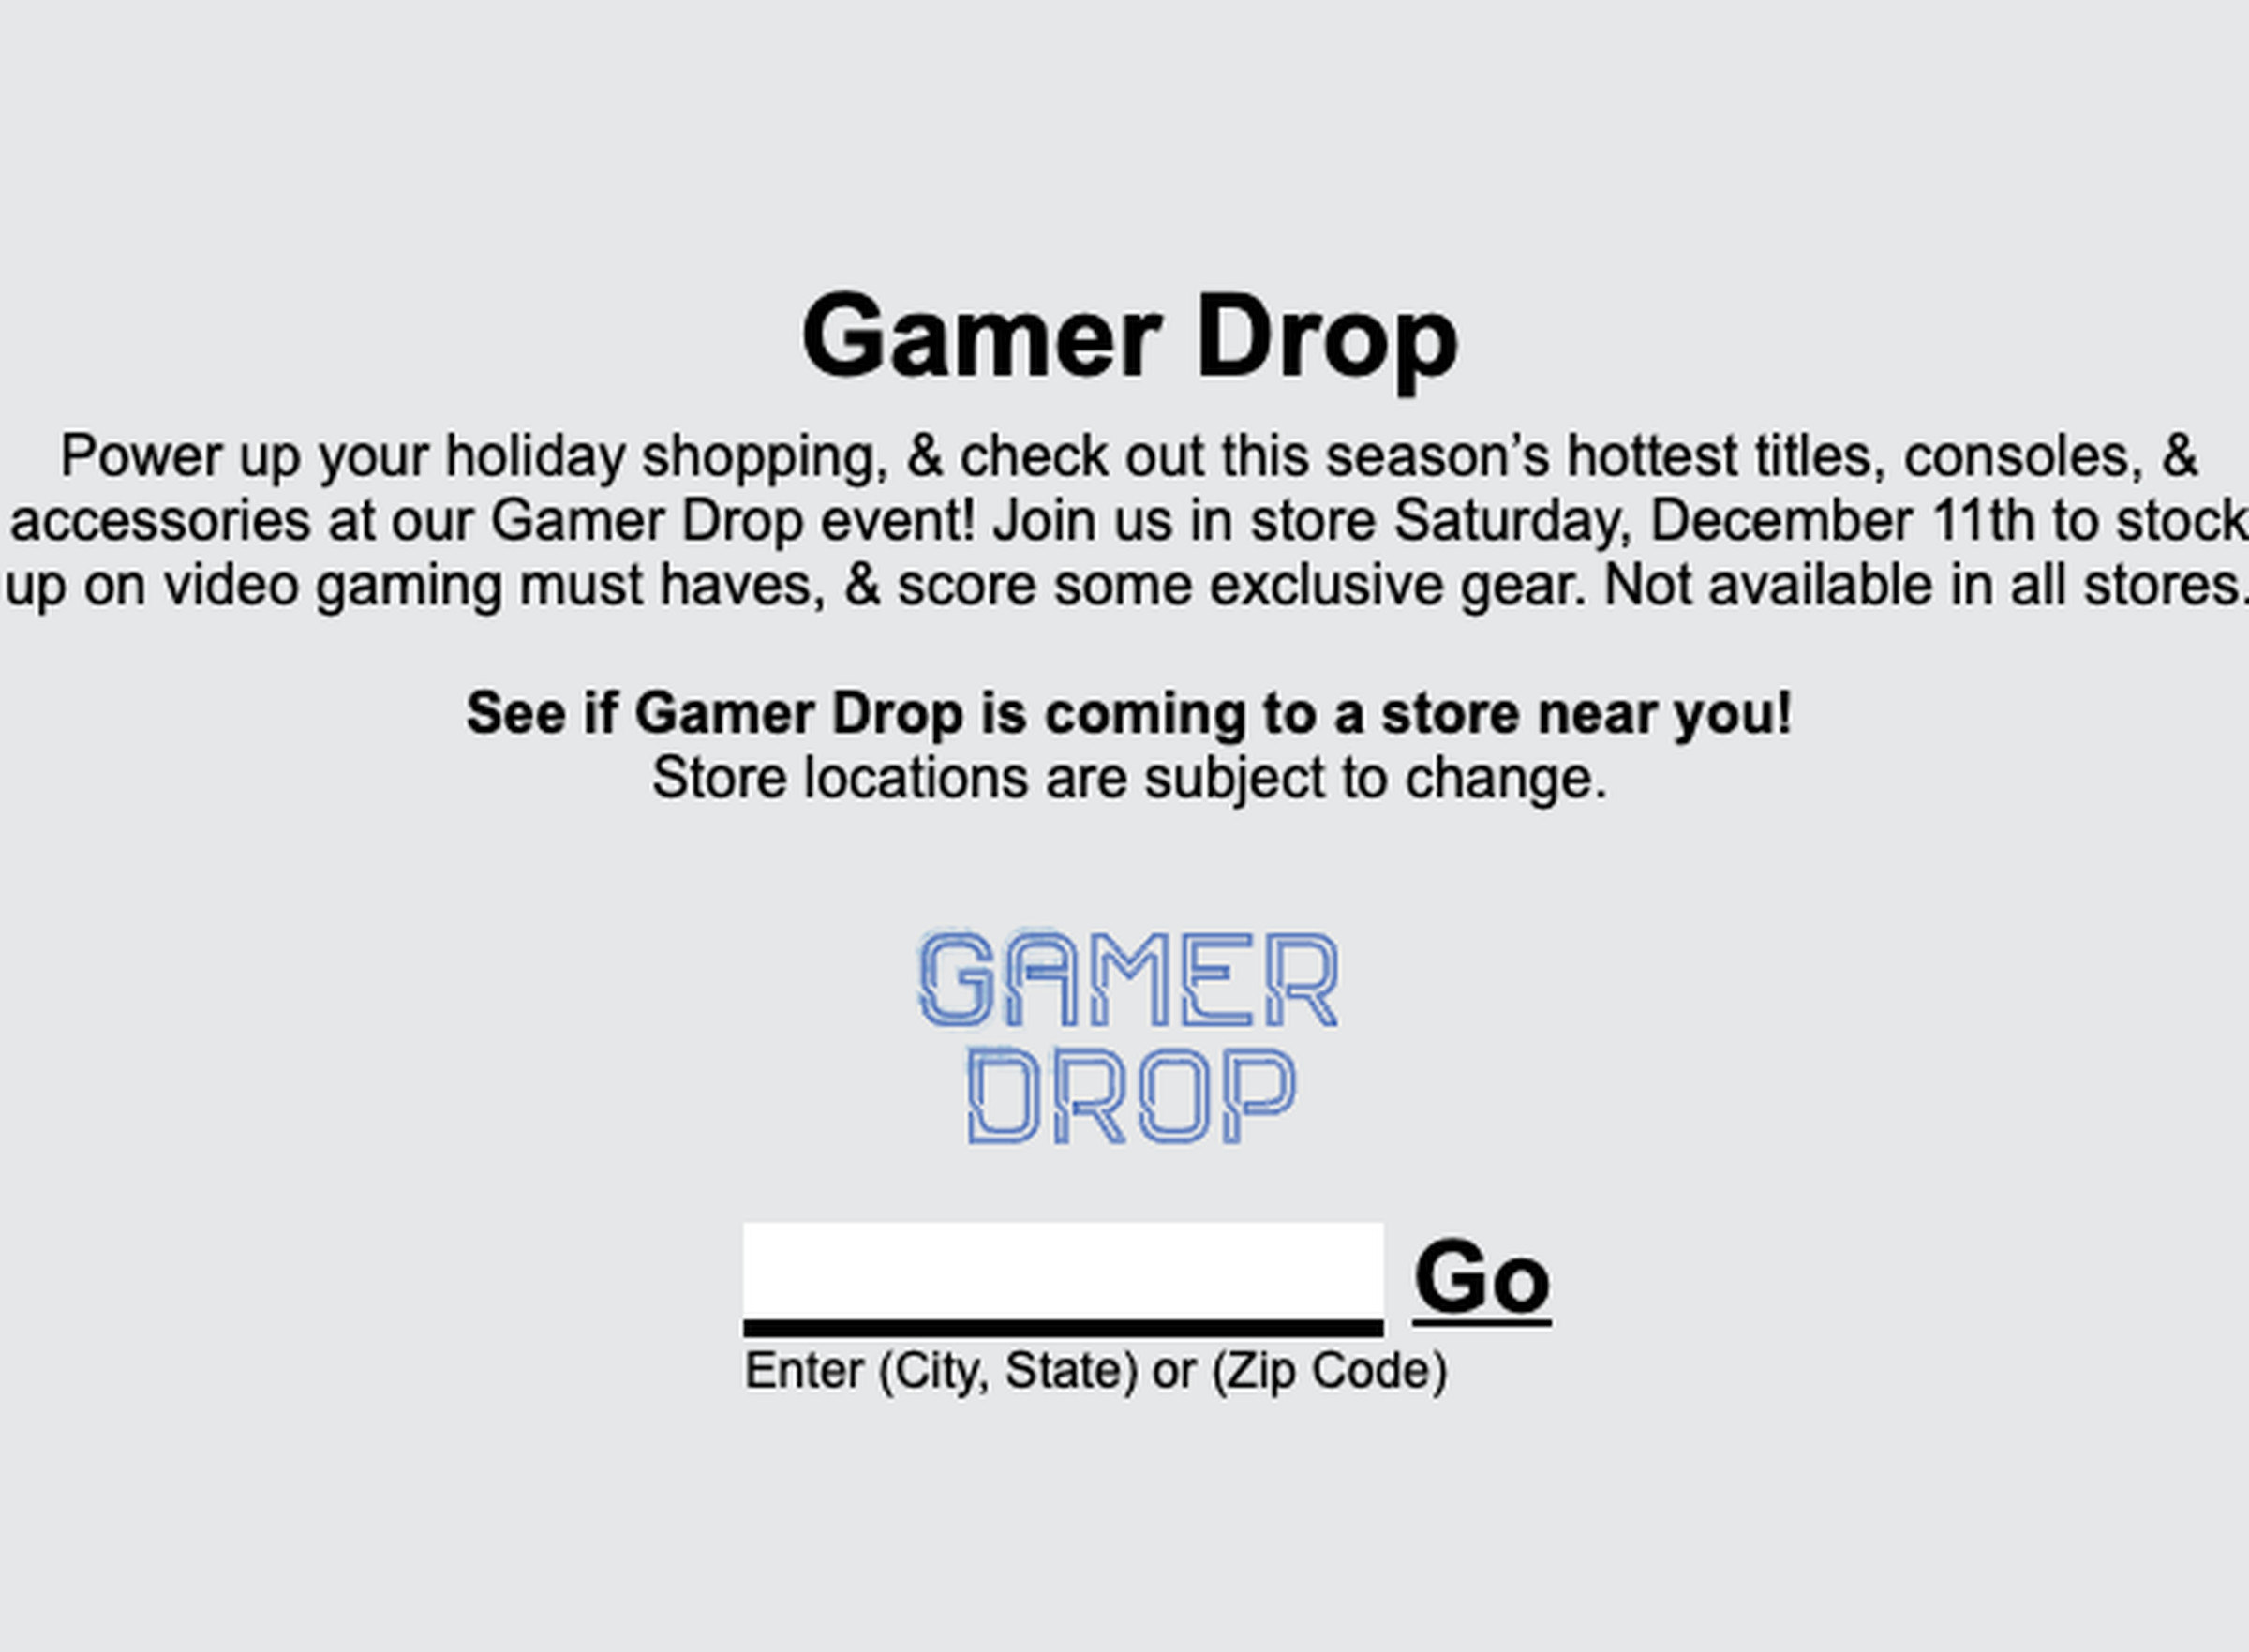 The Walmart Gamer Drop site allows users to search if their local store is participating. 